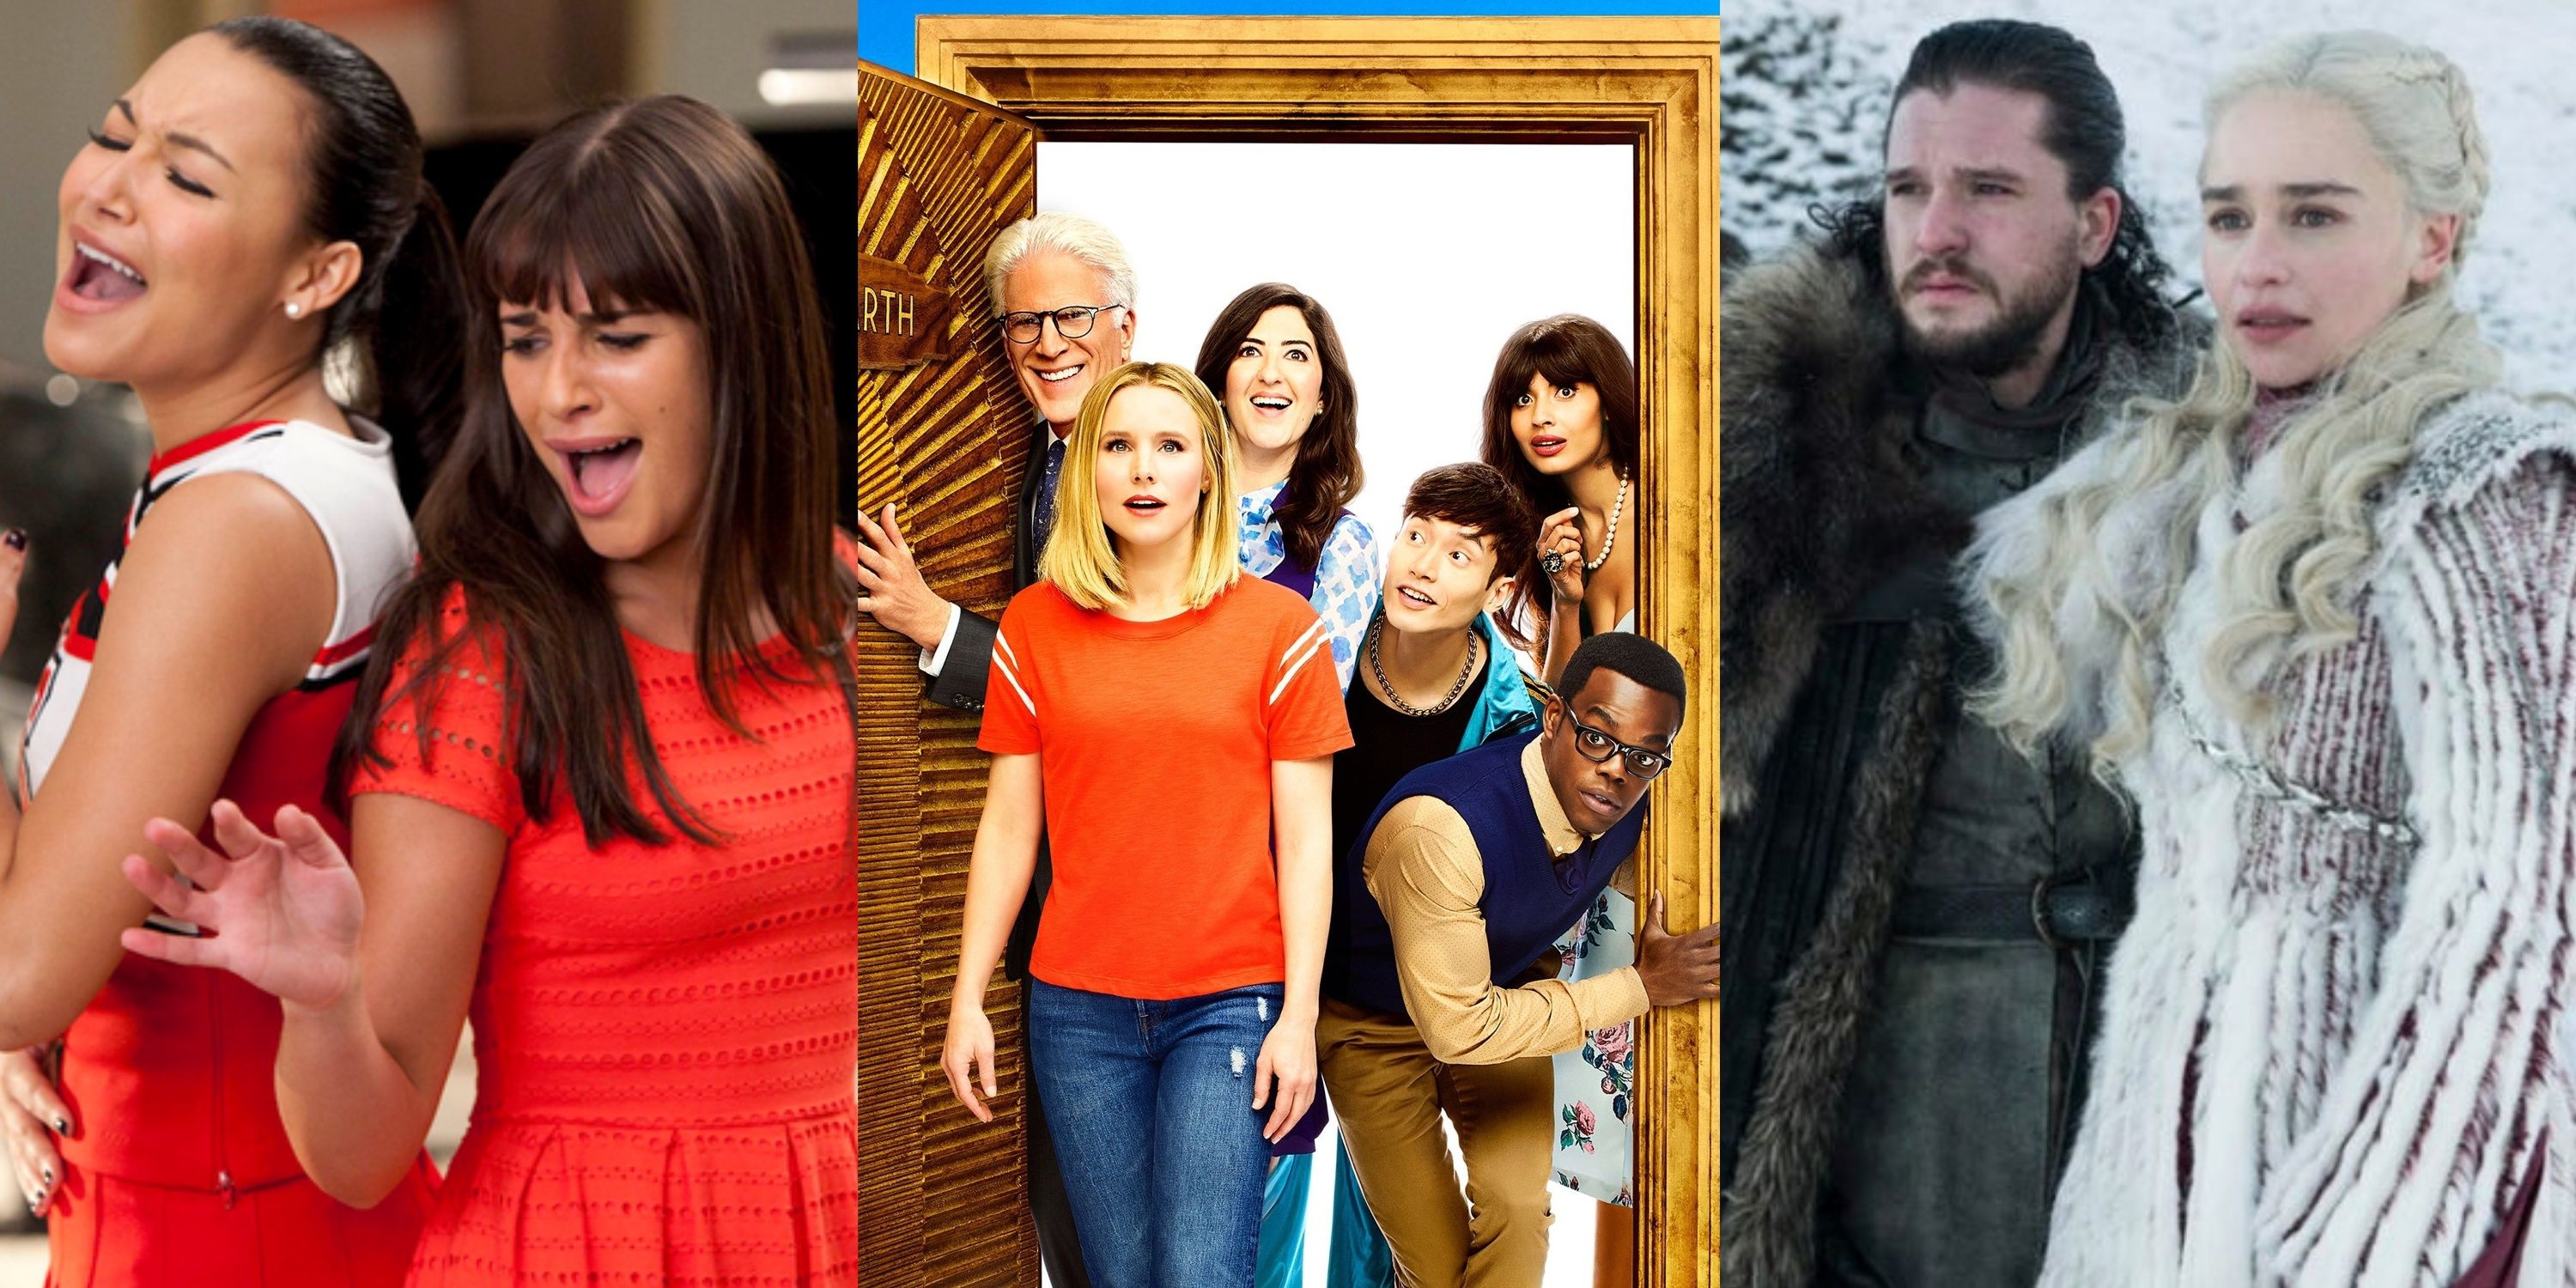 Split image of Santana and Rachel singing back to back, the characters of The Good Place going through a door in awe, and Jon and Daenerys from Game of Thrones looking left